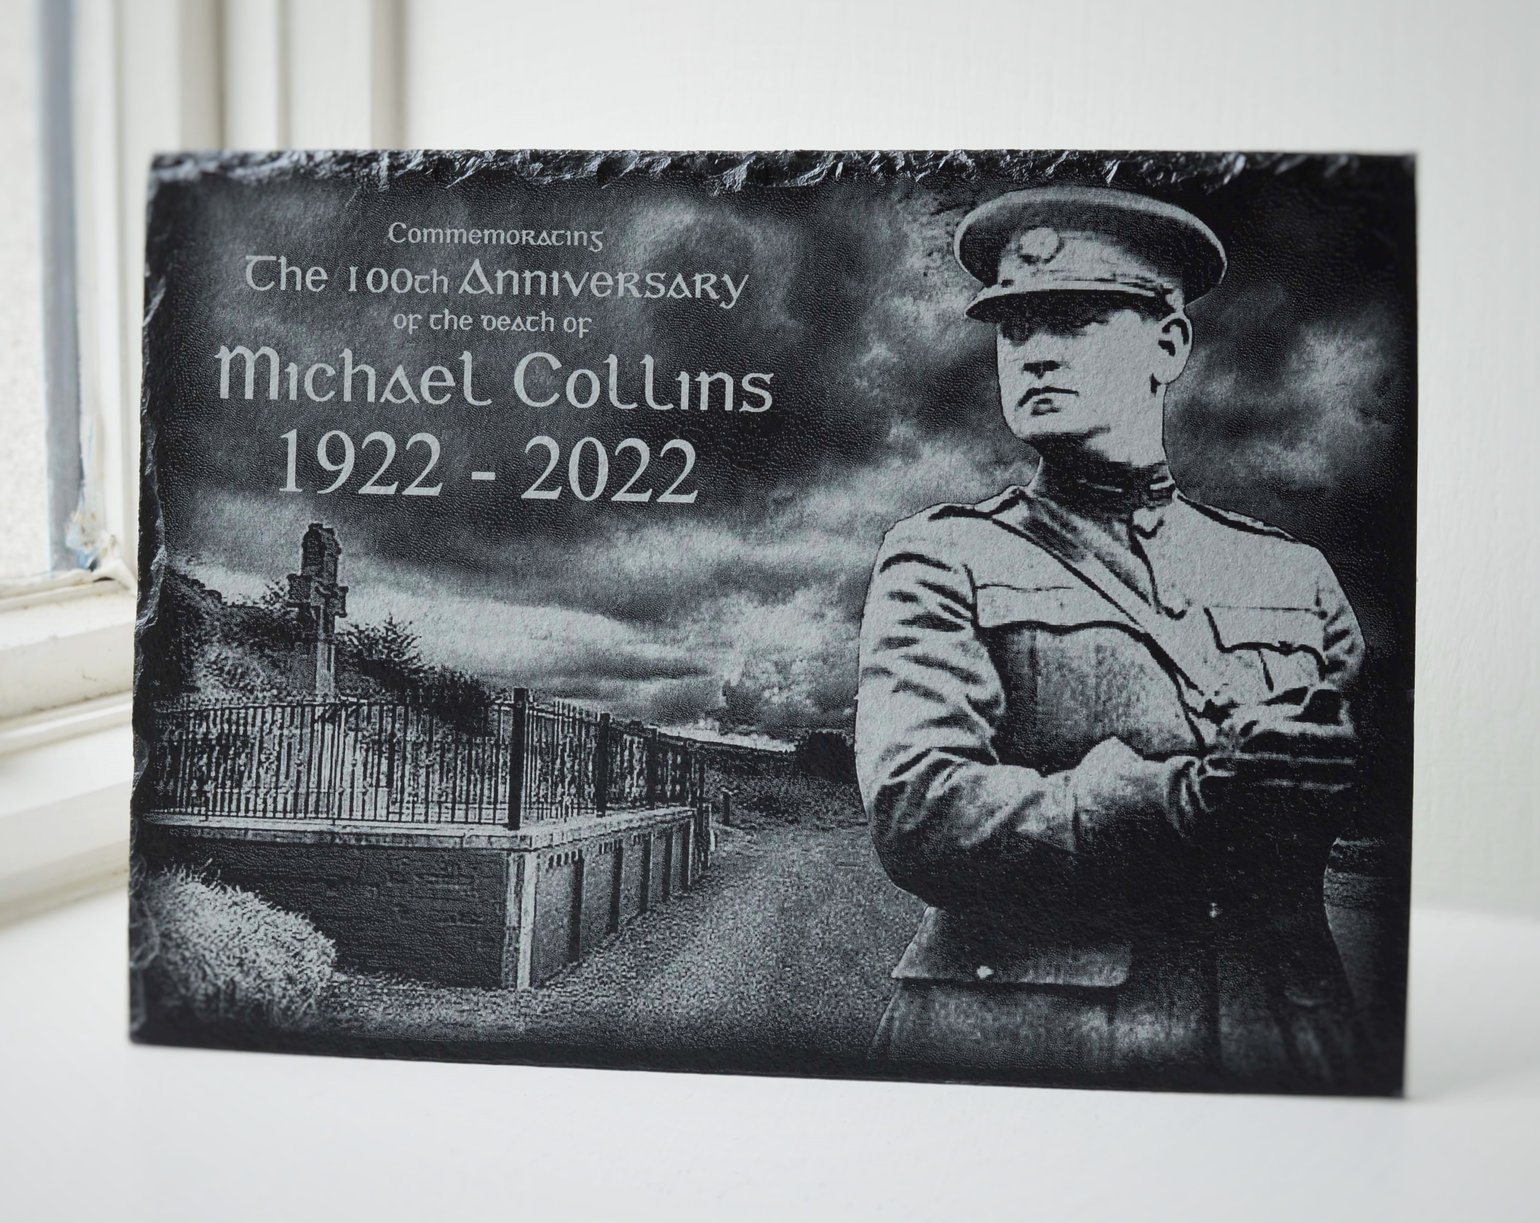 Image of Michael Collins 100th Anniversary 1922 - 2022